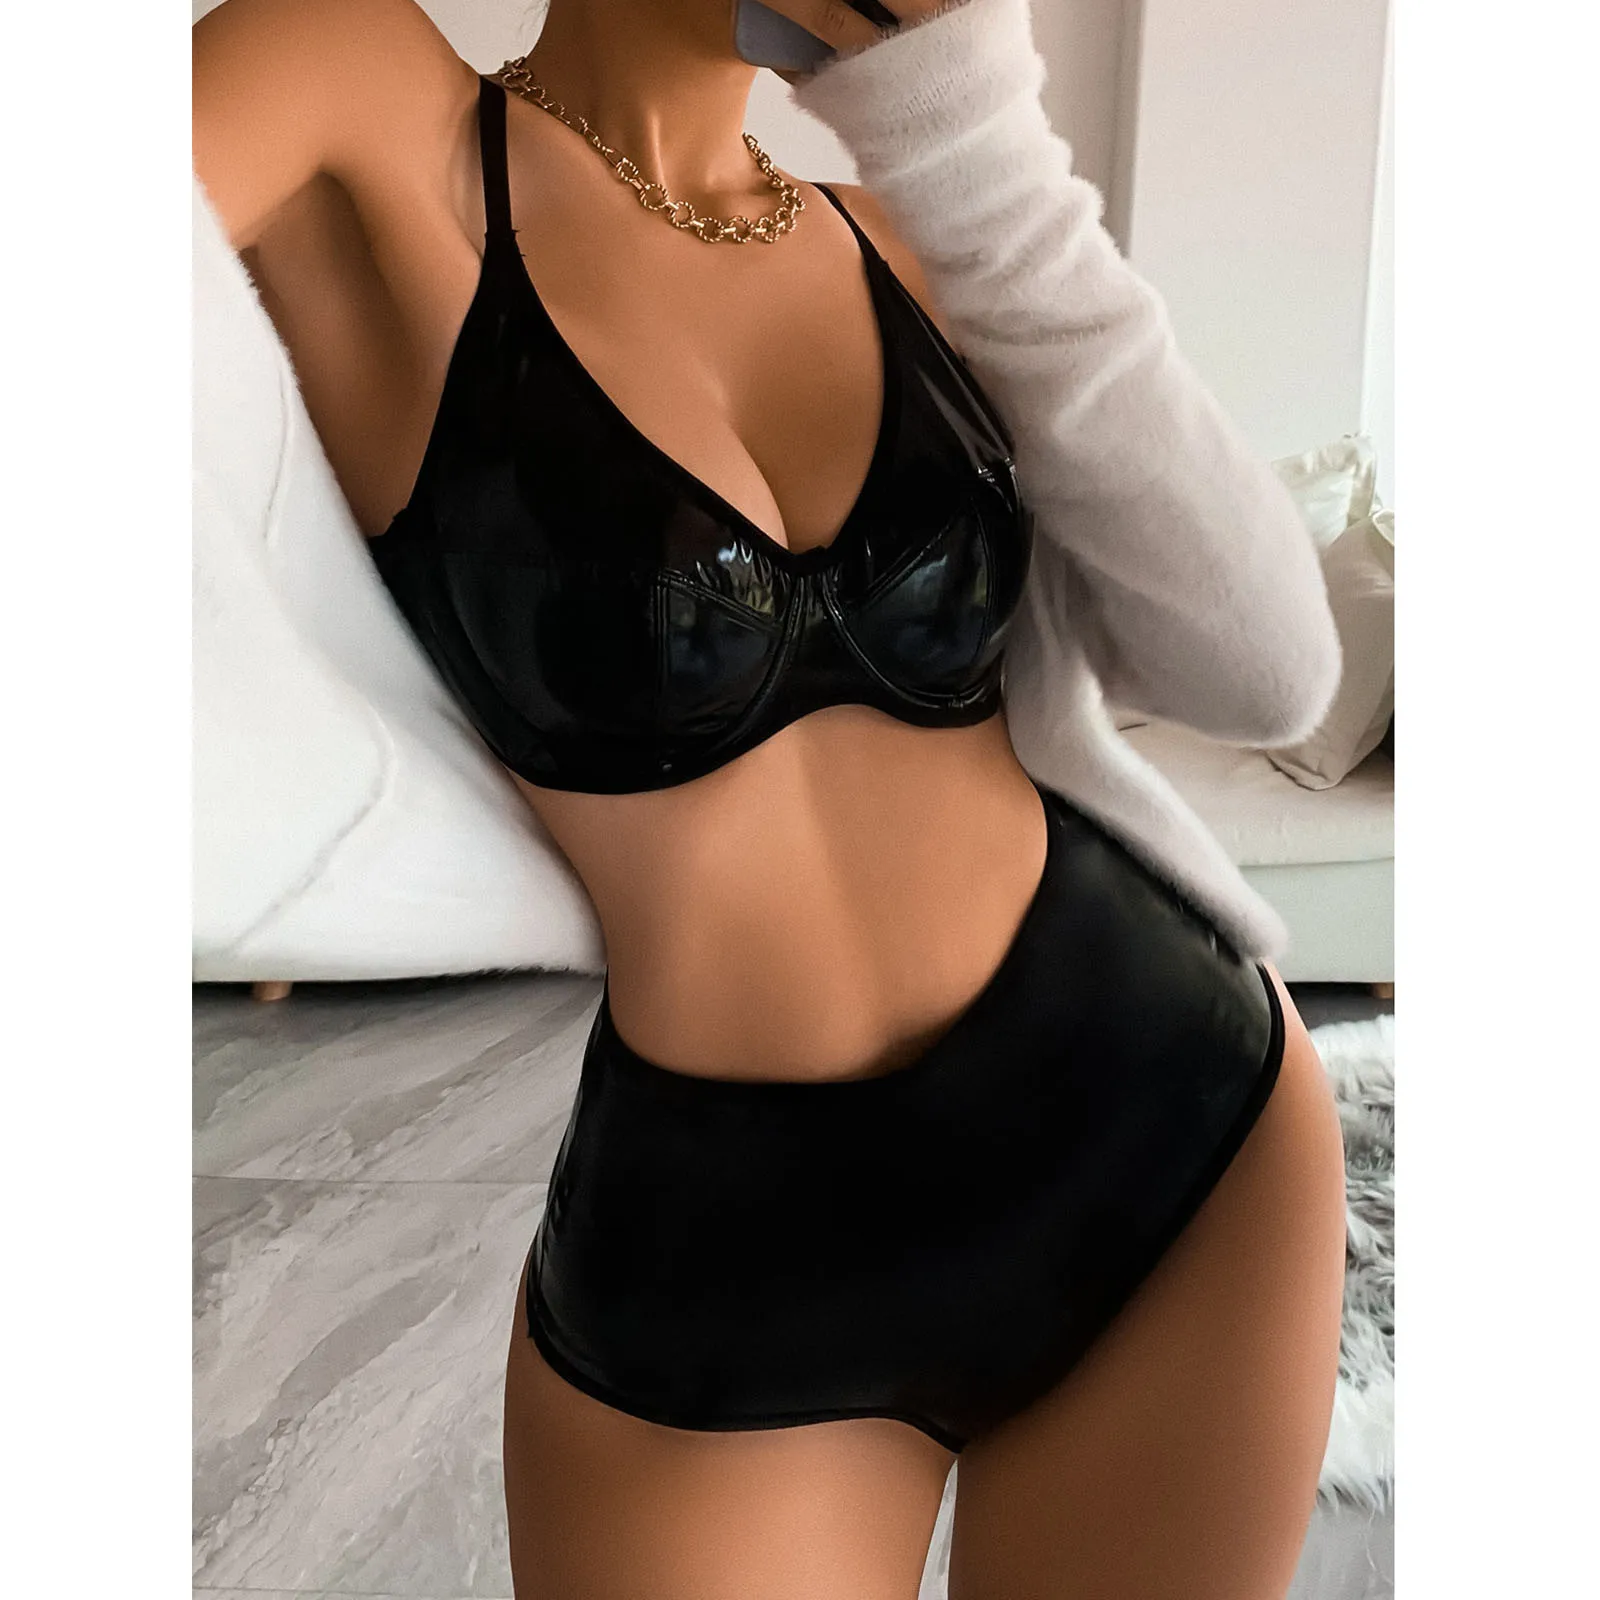 Sexy Women Latex Lingerie Two-piece Pu Leather Women Steel Ring Push Up Bra For Ladies Sexy Lingerie High Waist Underwear Set bra and brief sets